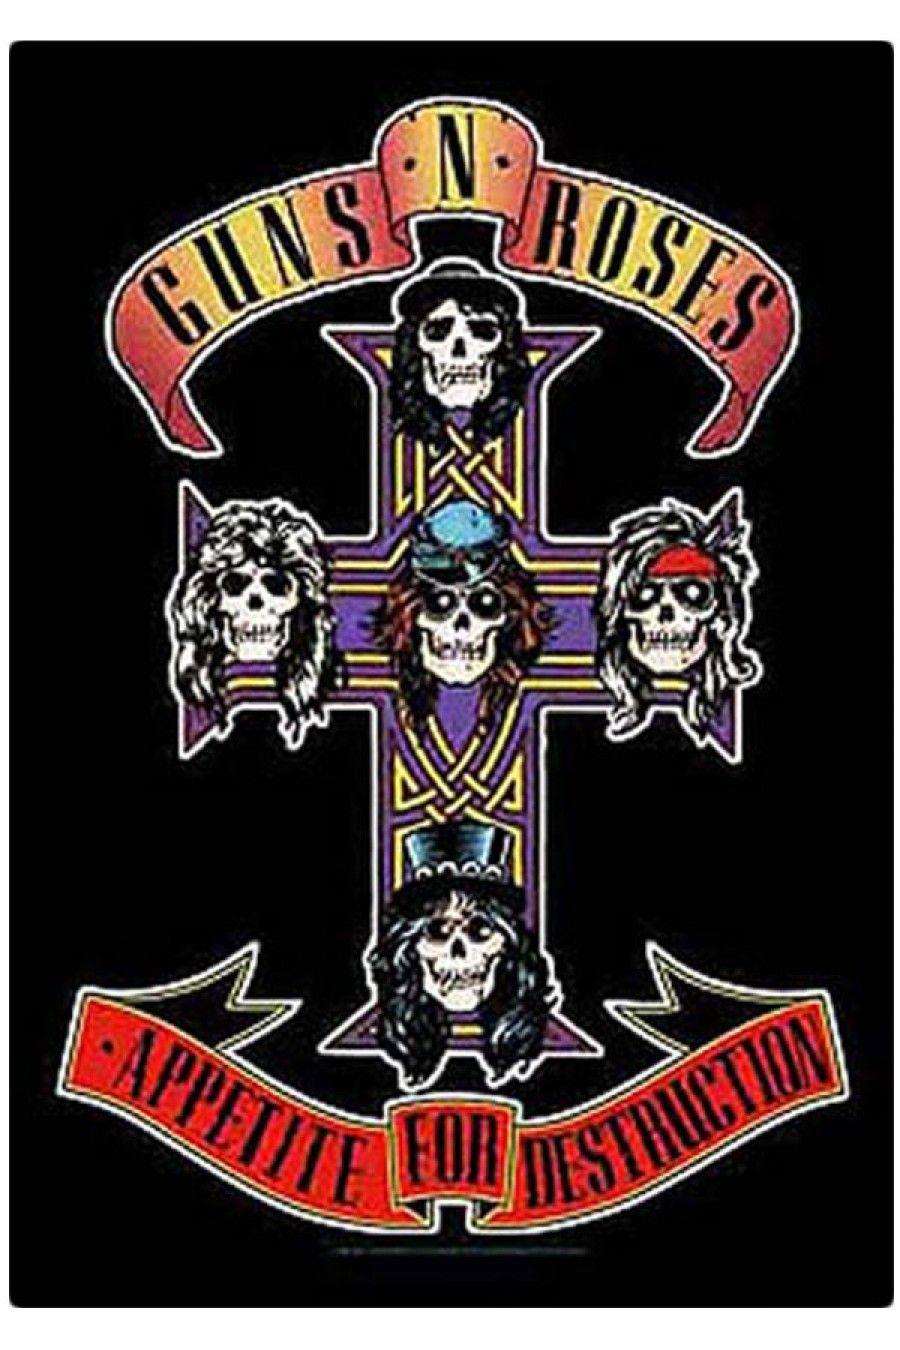 Guns and Roses Appetite for Destruction Logo - Hey it's Steven Adler from Guns N' Roses here today with my mom